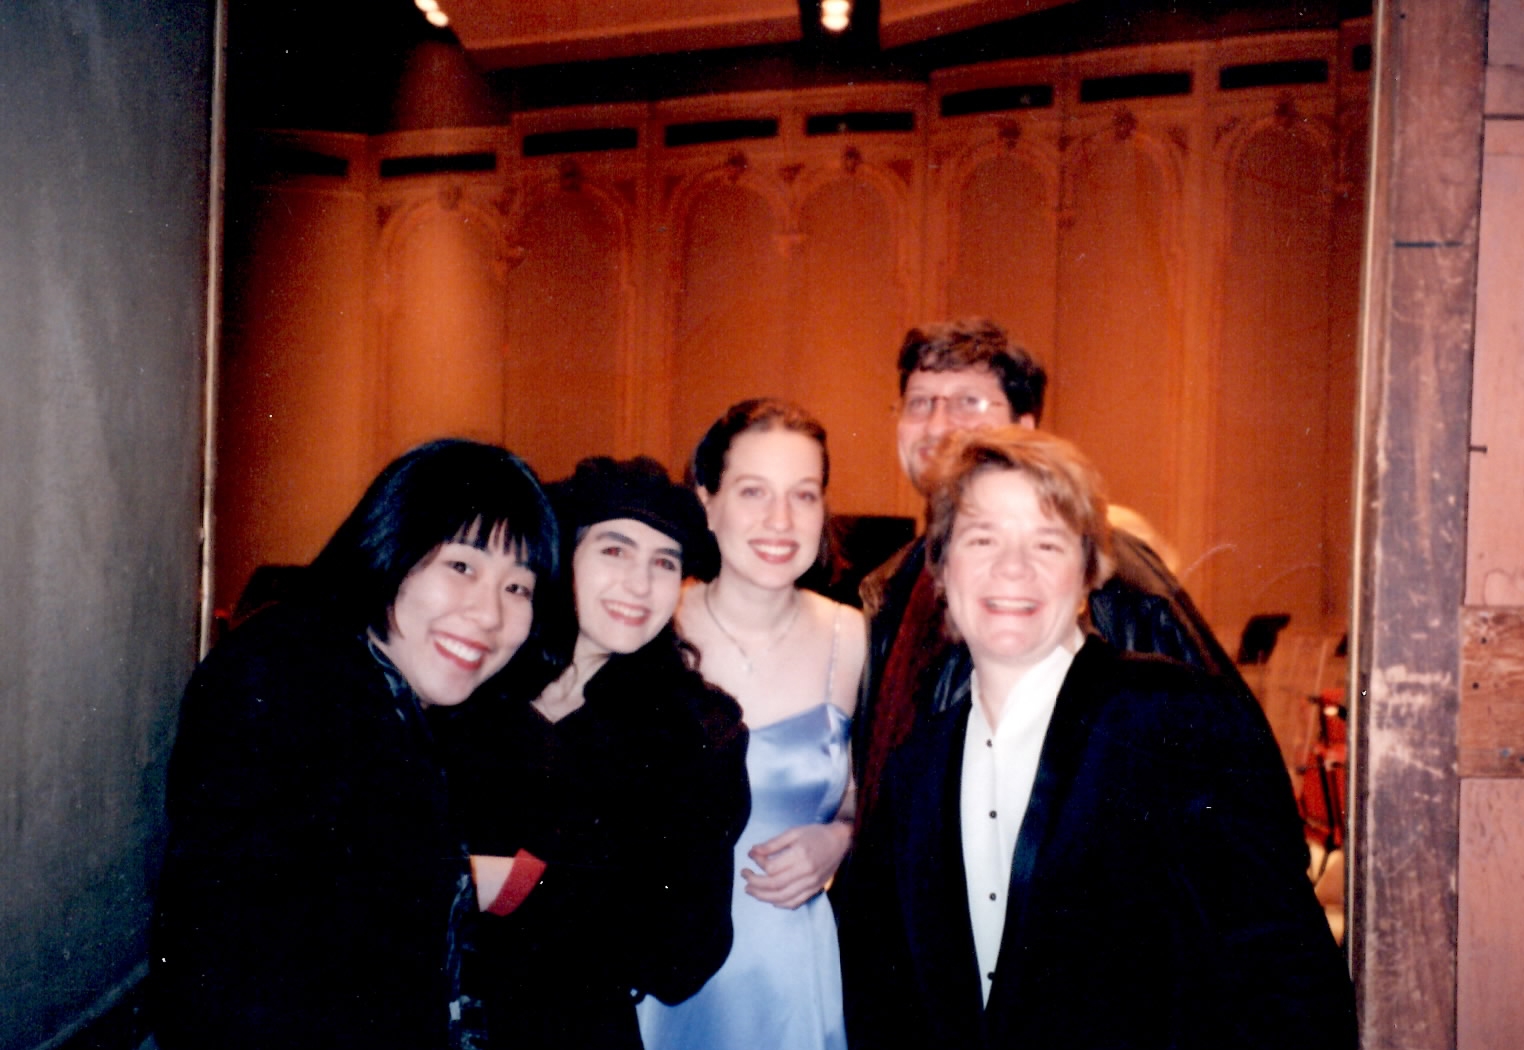  Marin Alsop and friends backstage after my Barber Concerto premiere (1998) in Philadelphia at the Academy of Music. From left to right Amy, Stephanie, myself, Phil and Marin Alsop. 